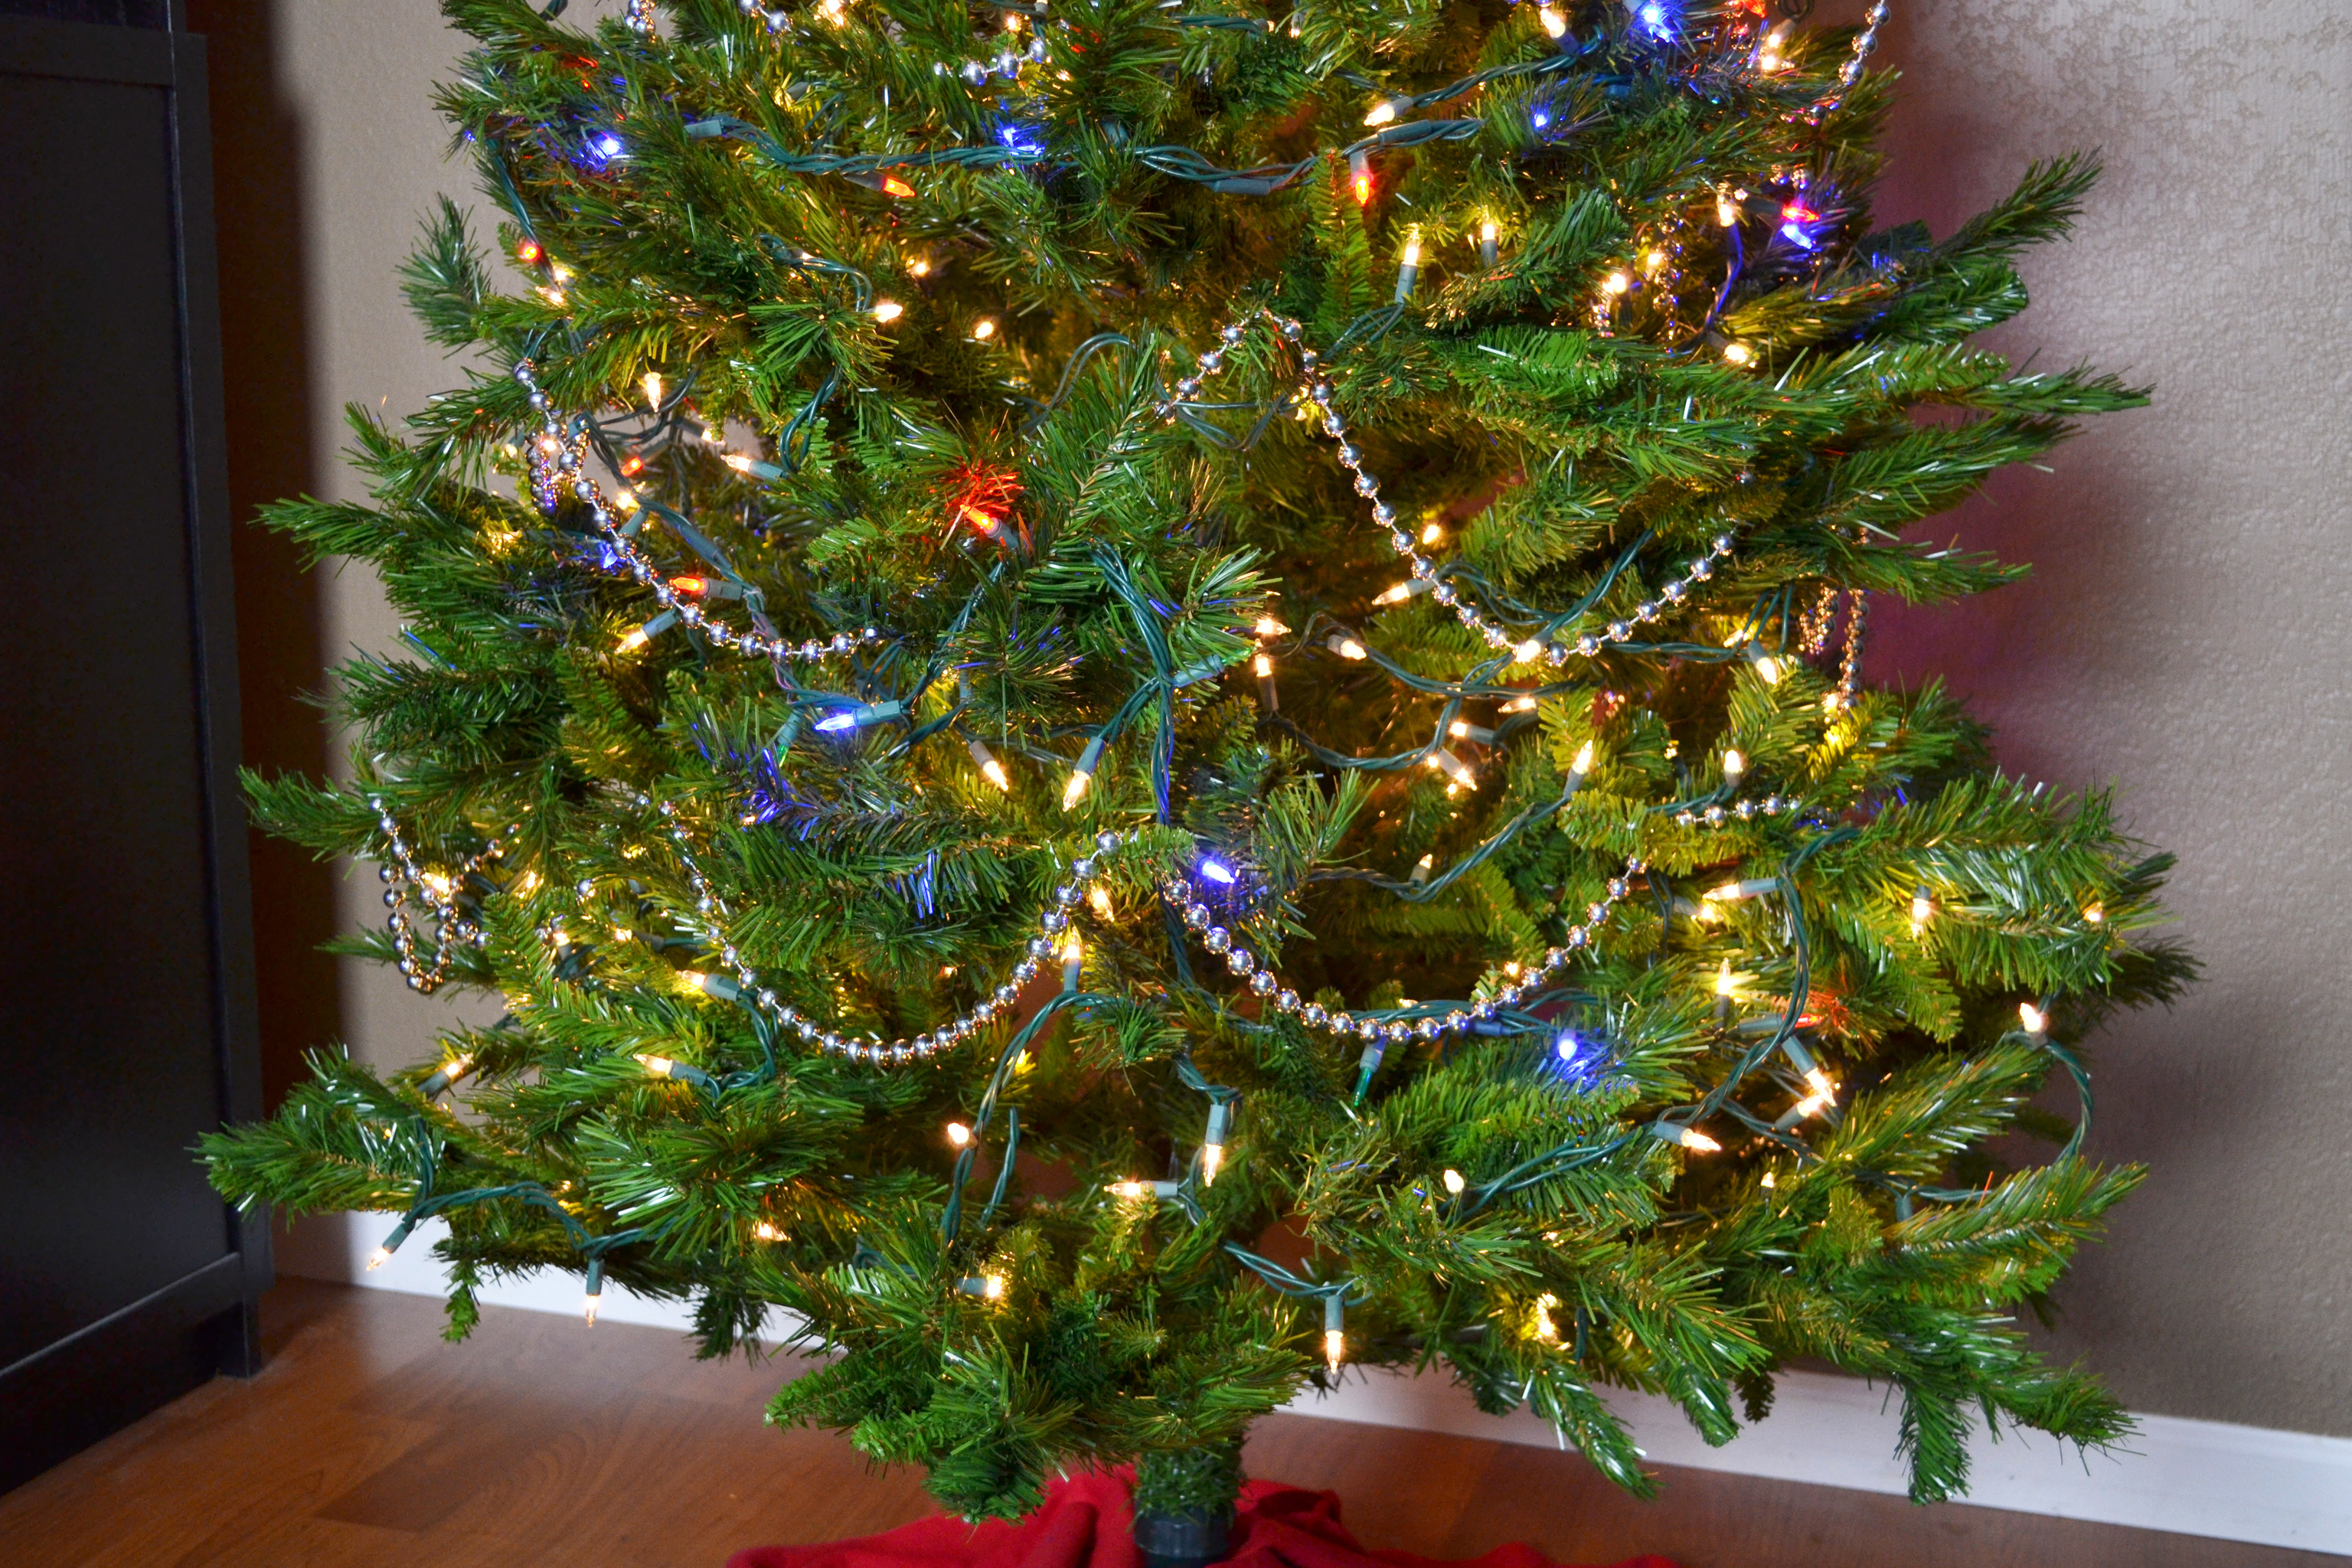 How to String Beads on a Christmas Tree